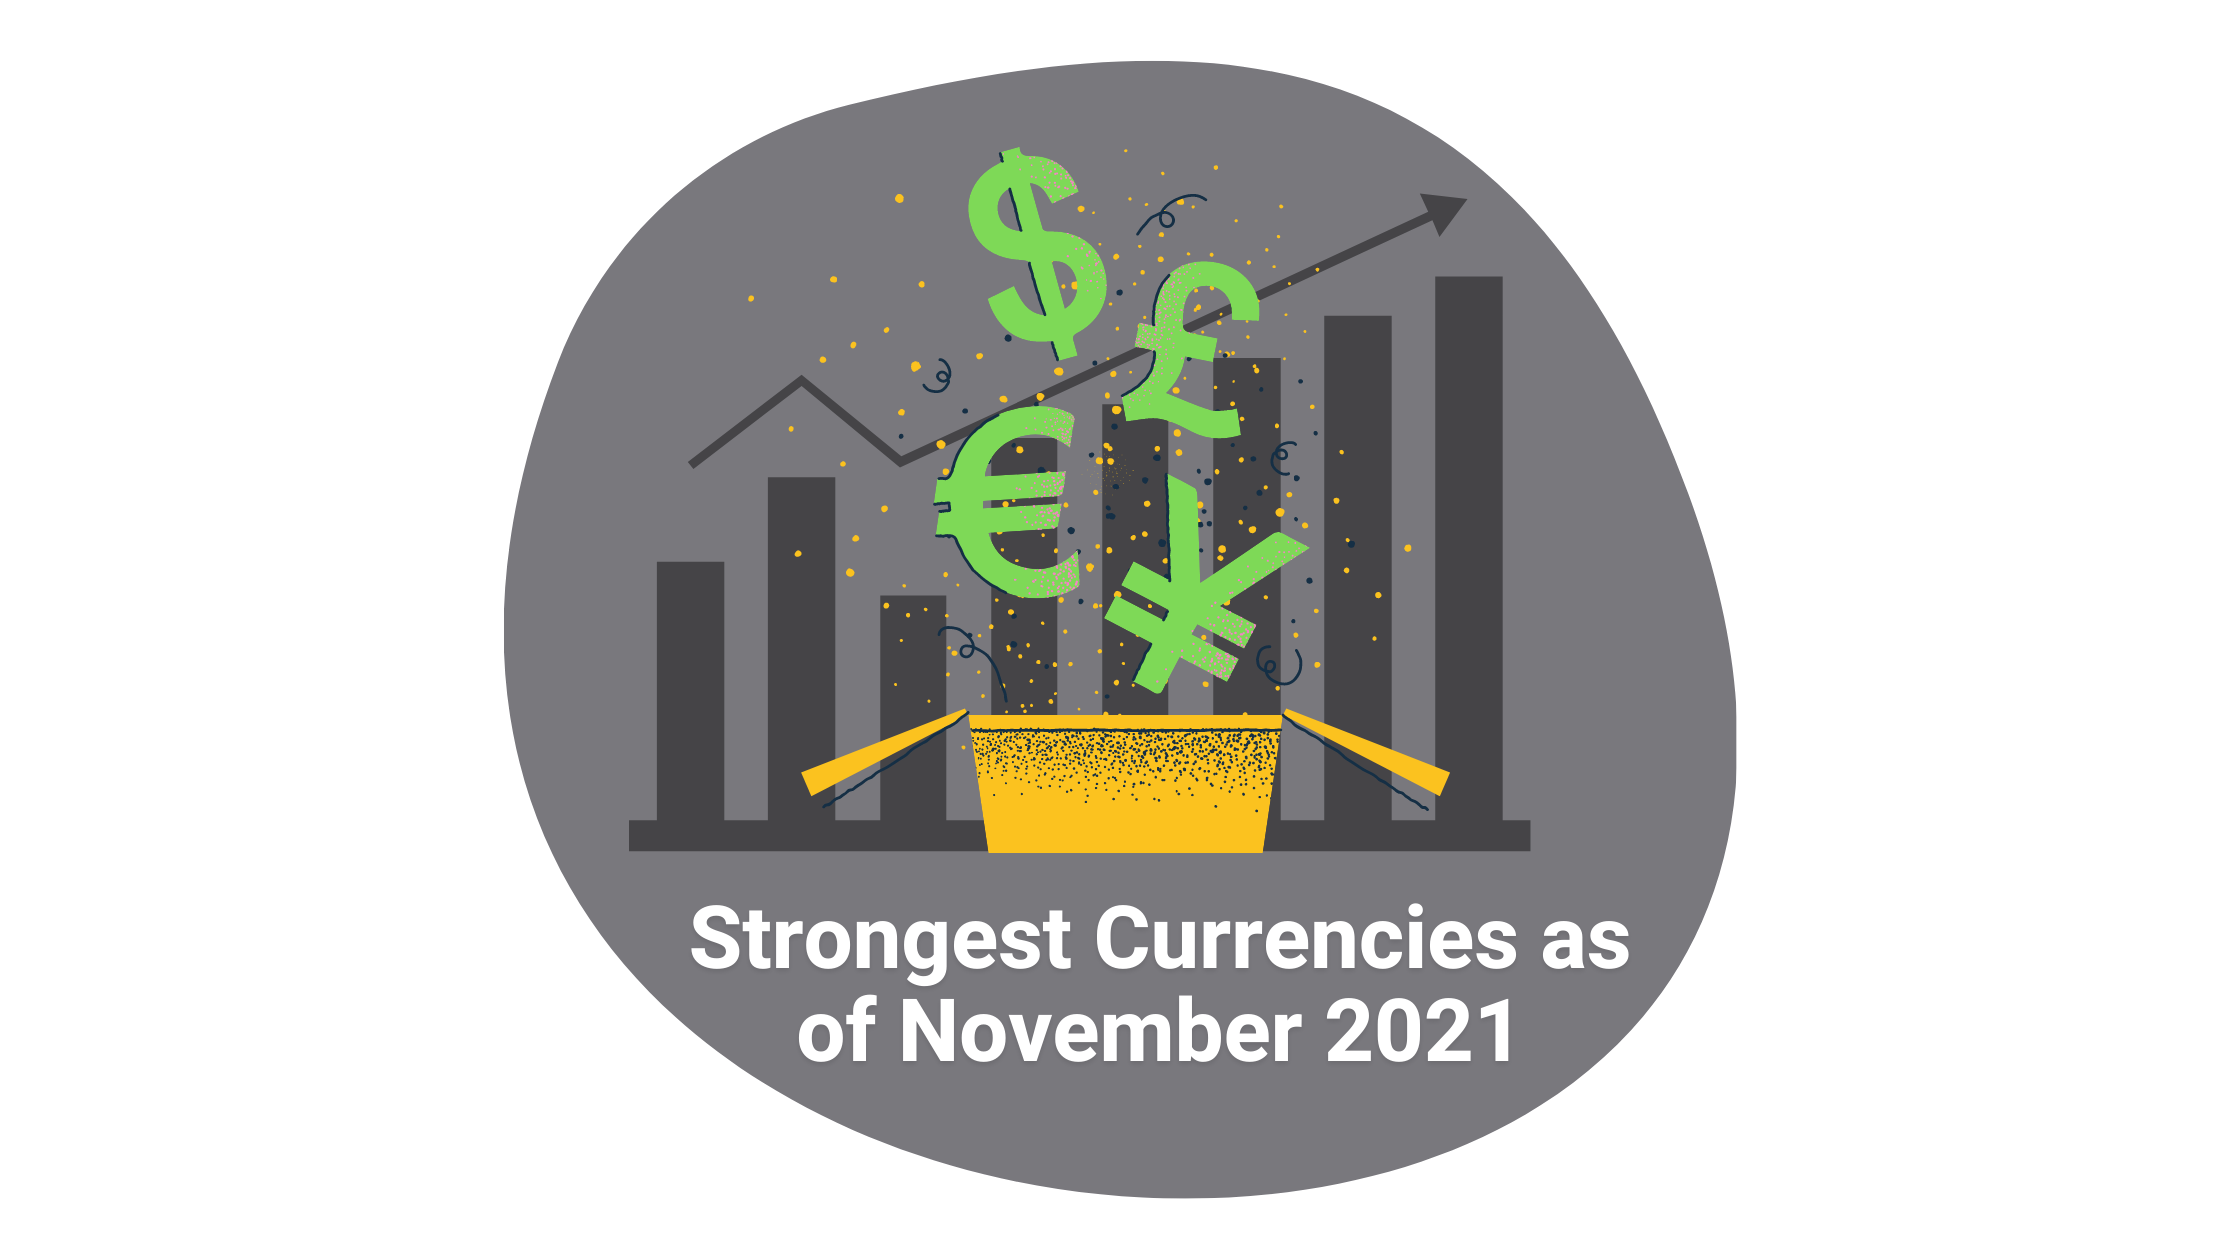  Strongest Currencies as of November 2021